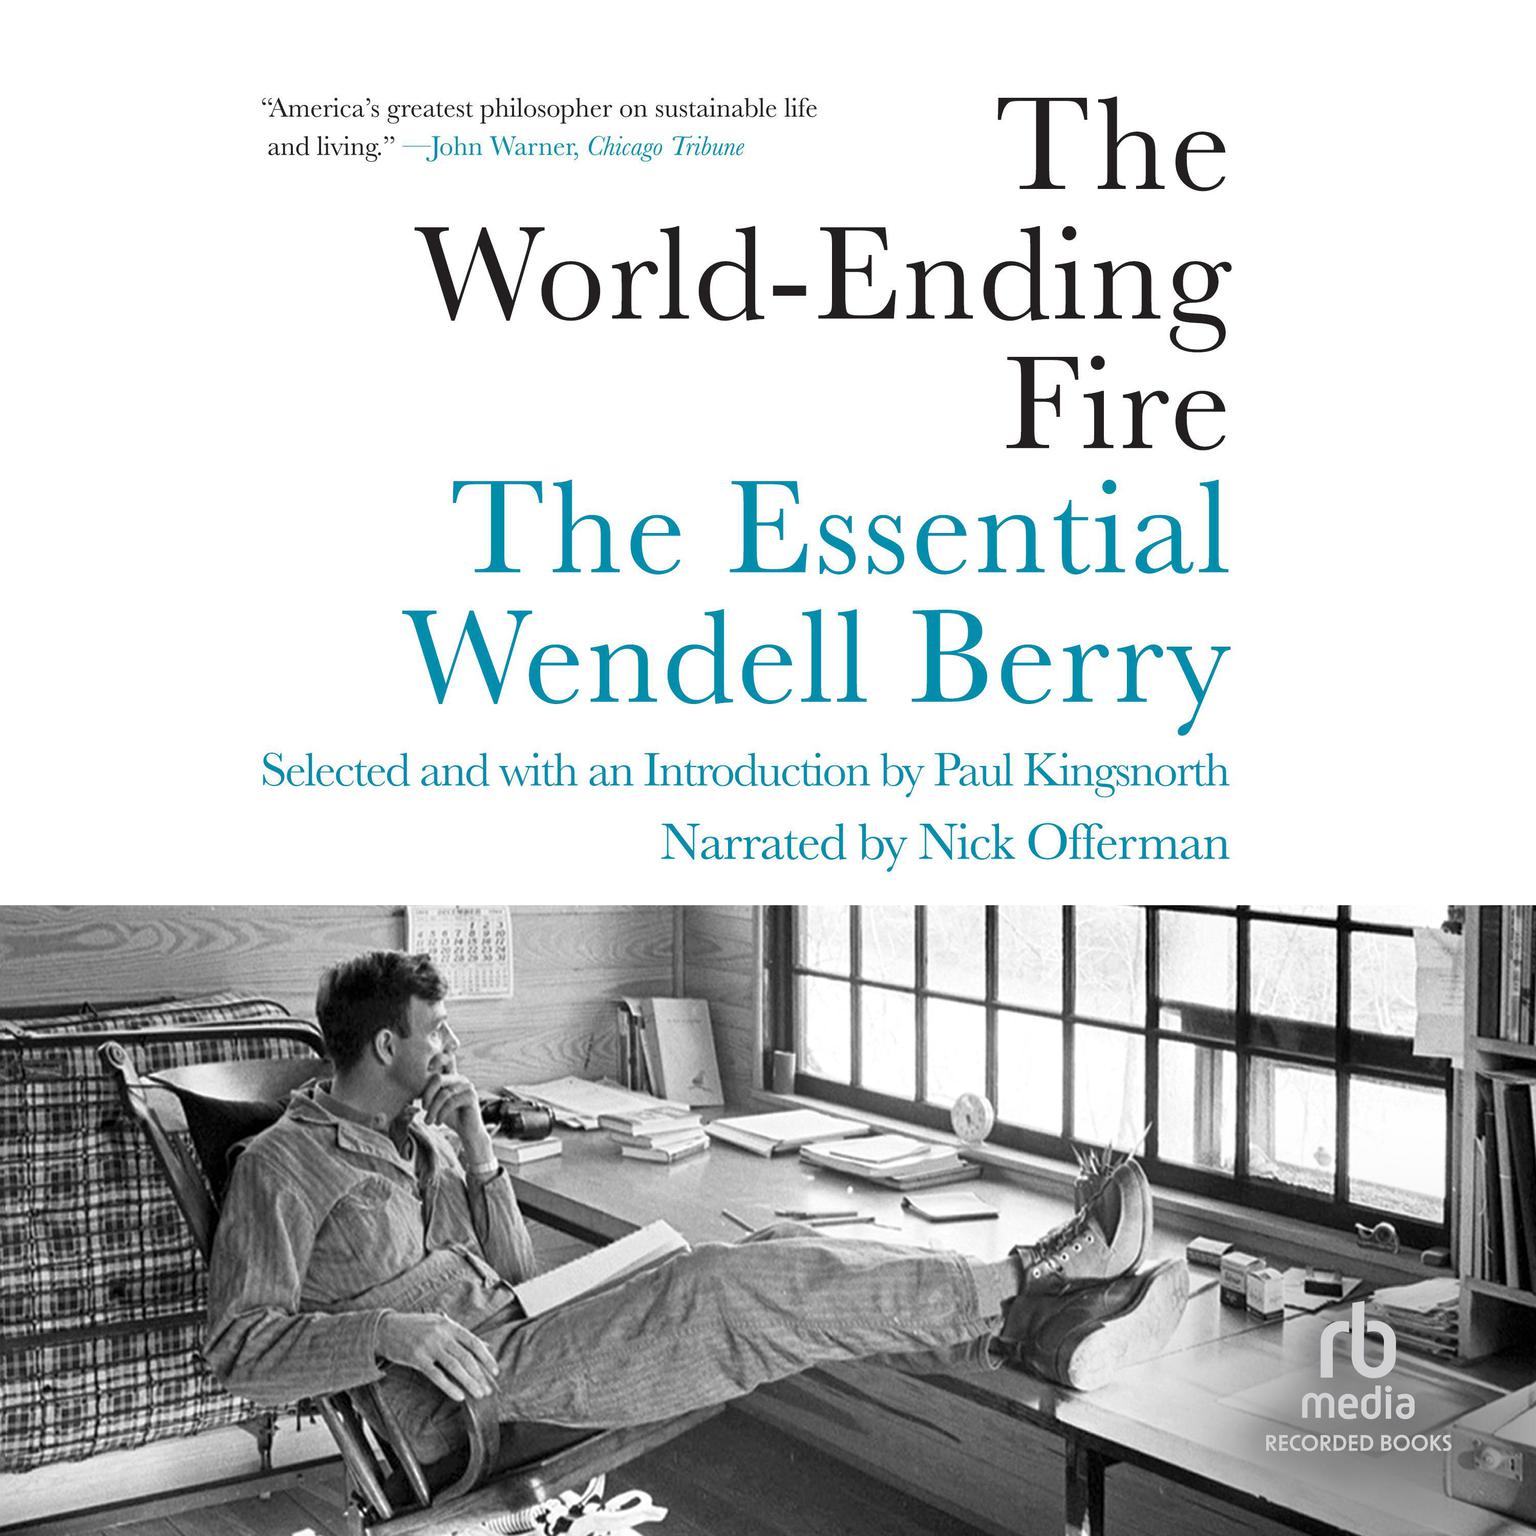 The World-Ending Fire: The Essential Wendell Berry Audiobook, by Wendell Berry